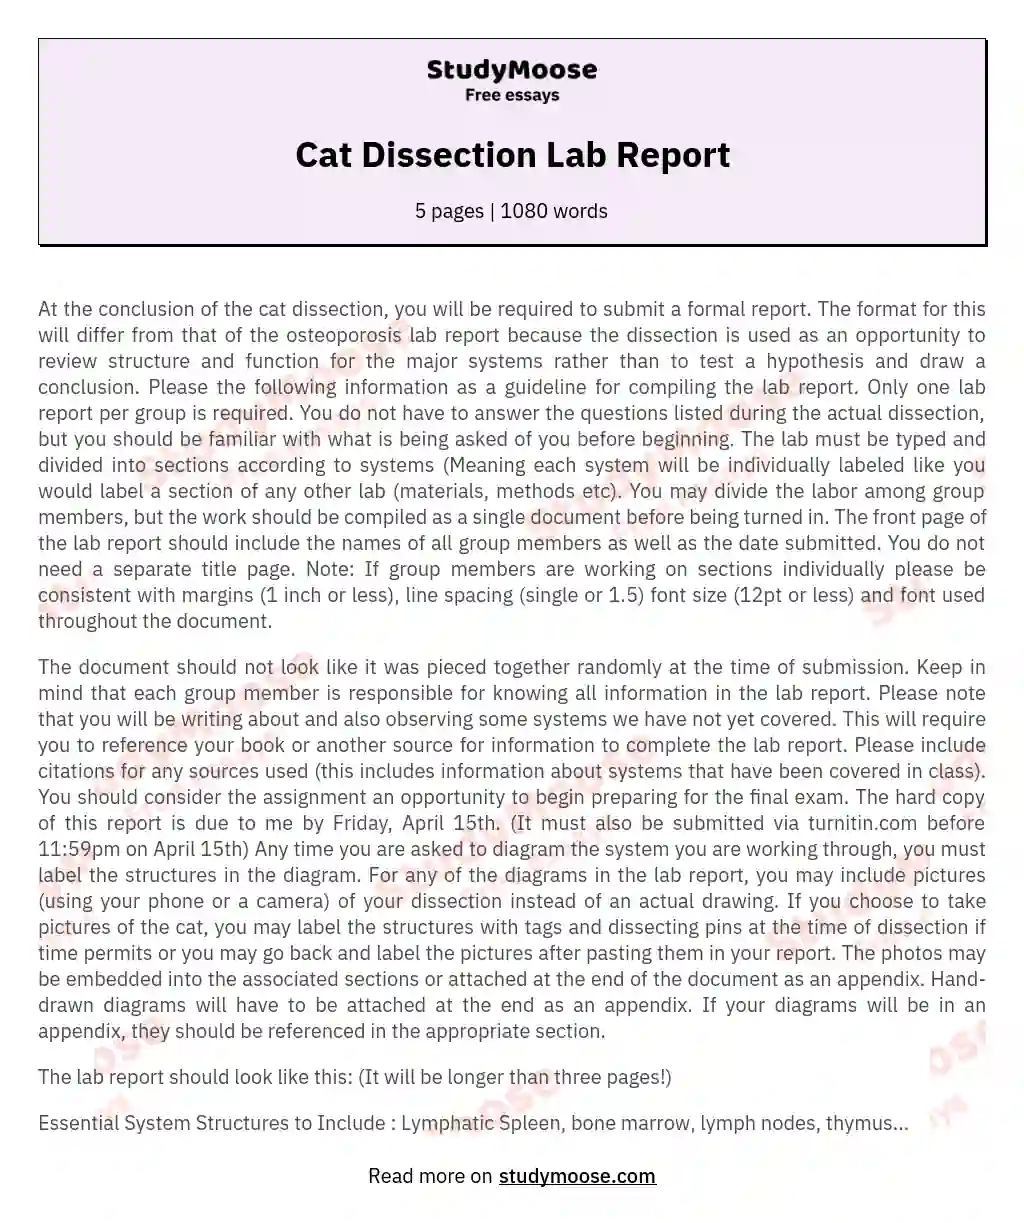 Cat Dissection Lab Report